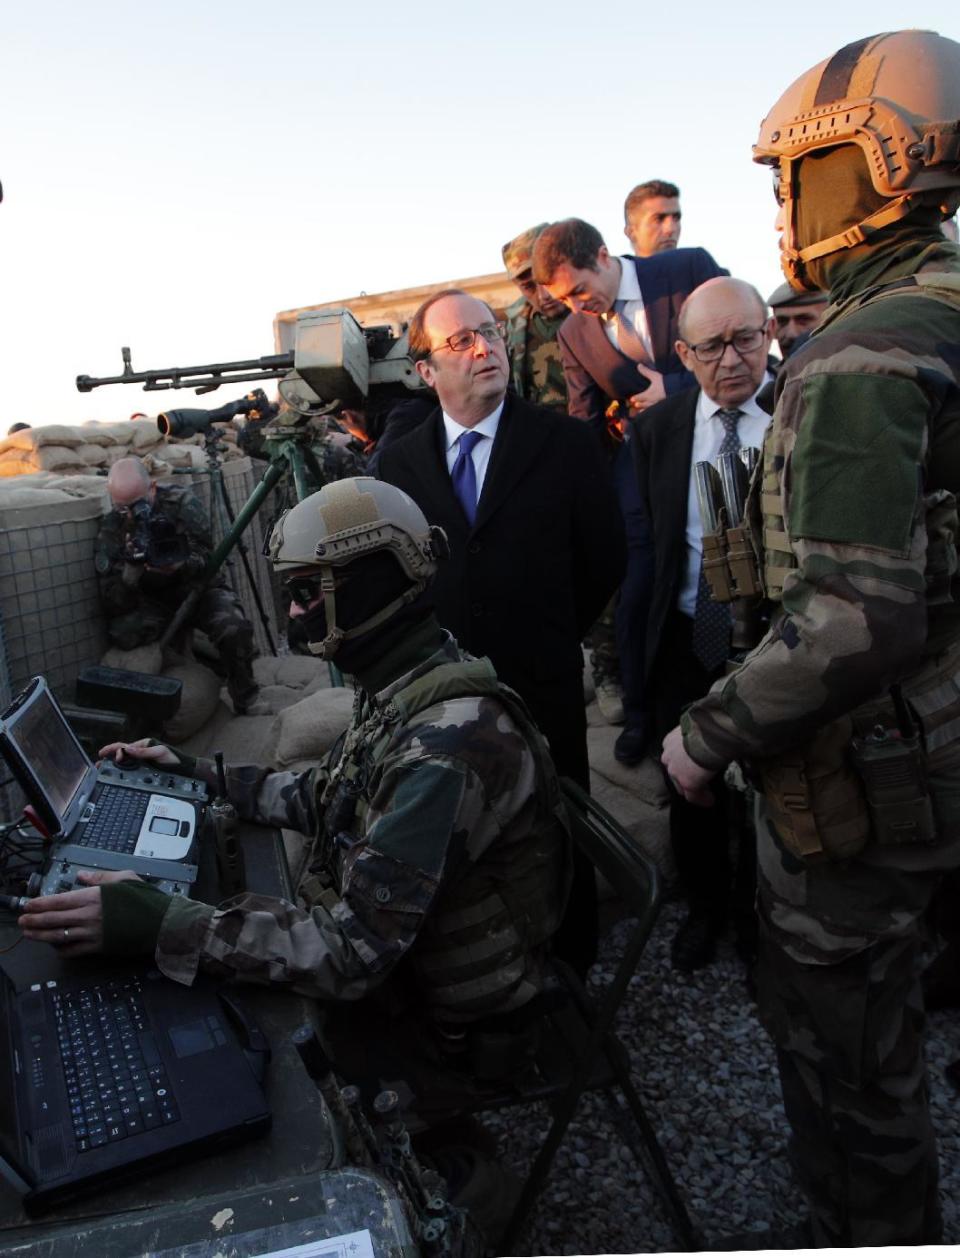 French President Francois Hollande and French defense minister Jean-Yves Le Drian, right, meet with French soldiers as they visit a military outpost on the outskirts of the Islamic State-held city of Mosul, outside the Kurdish city of Irbil, Iraq, Monday, Jan. 2, 2017. Hollande is in Iraq for a one-day visit. (AP Photo/ Christophe Ena, Pool)